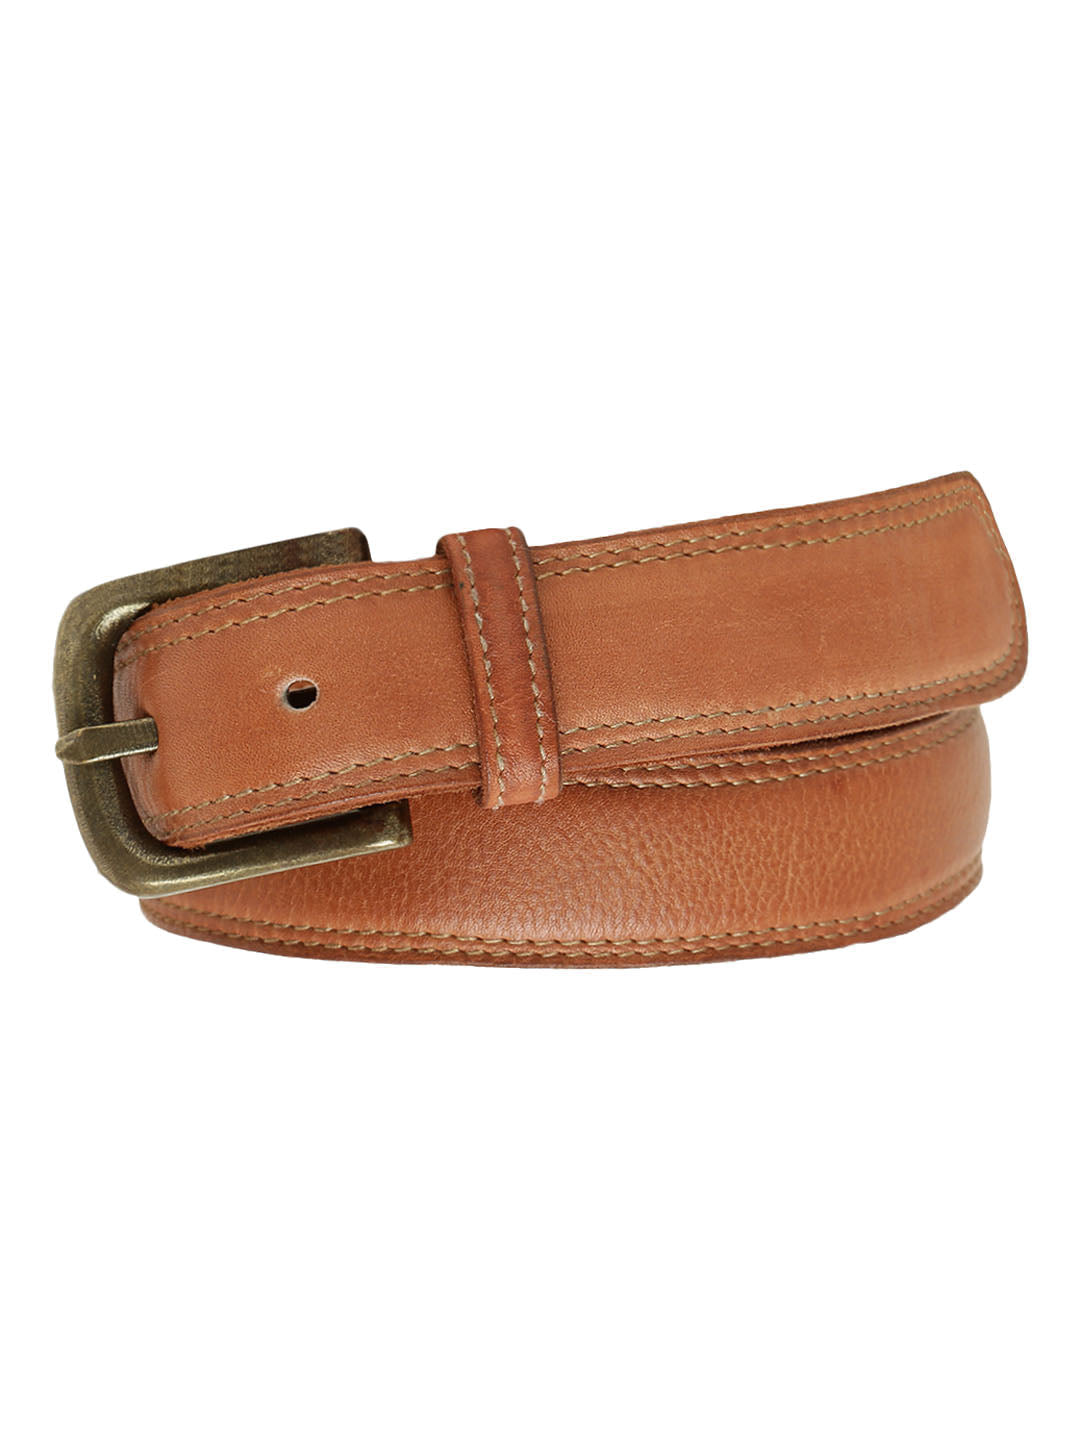 Plain With Side Stitching Tan Mens Leather Belt